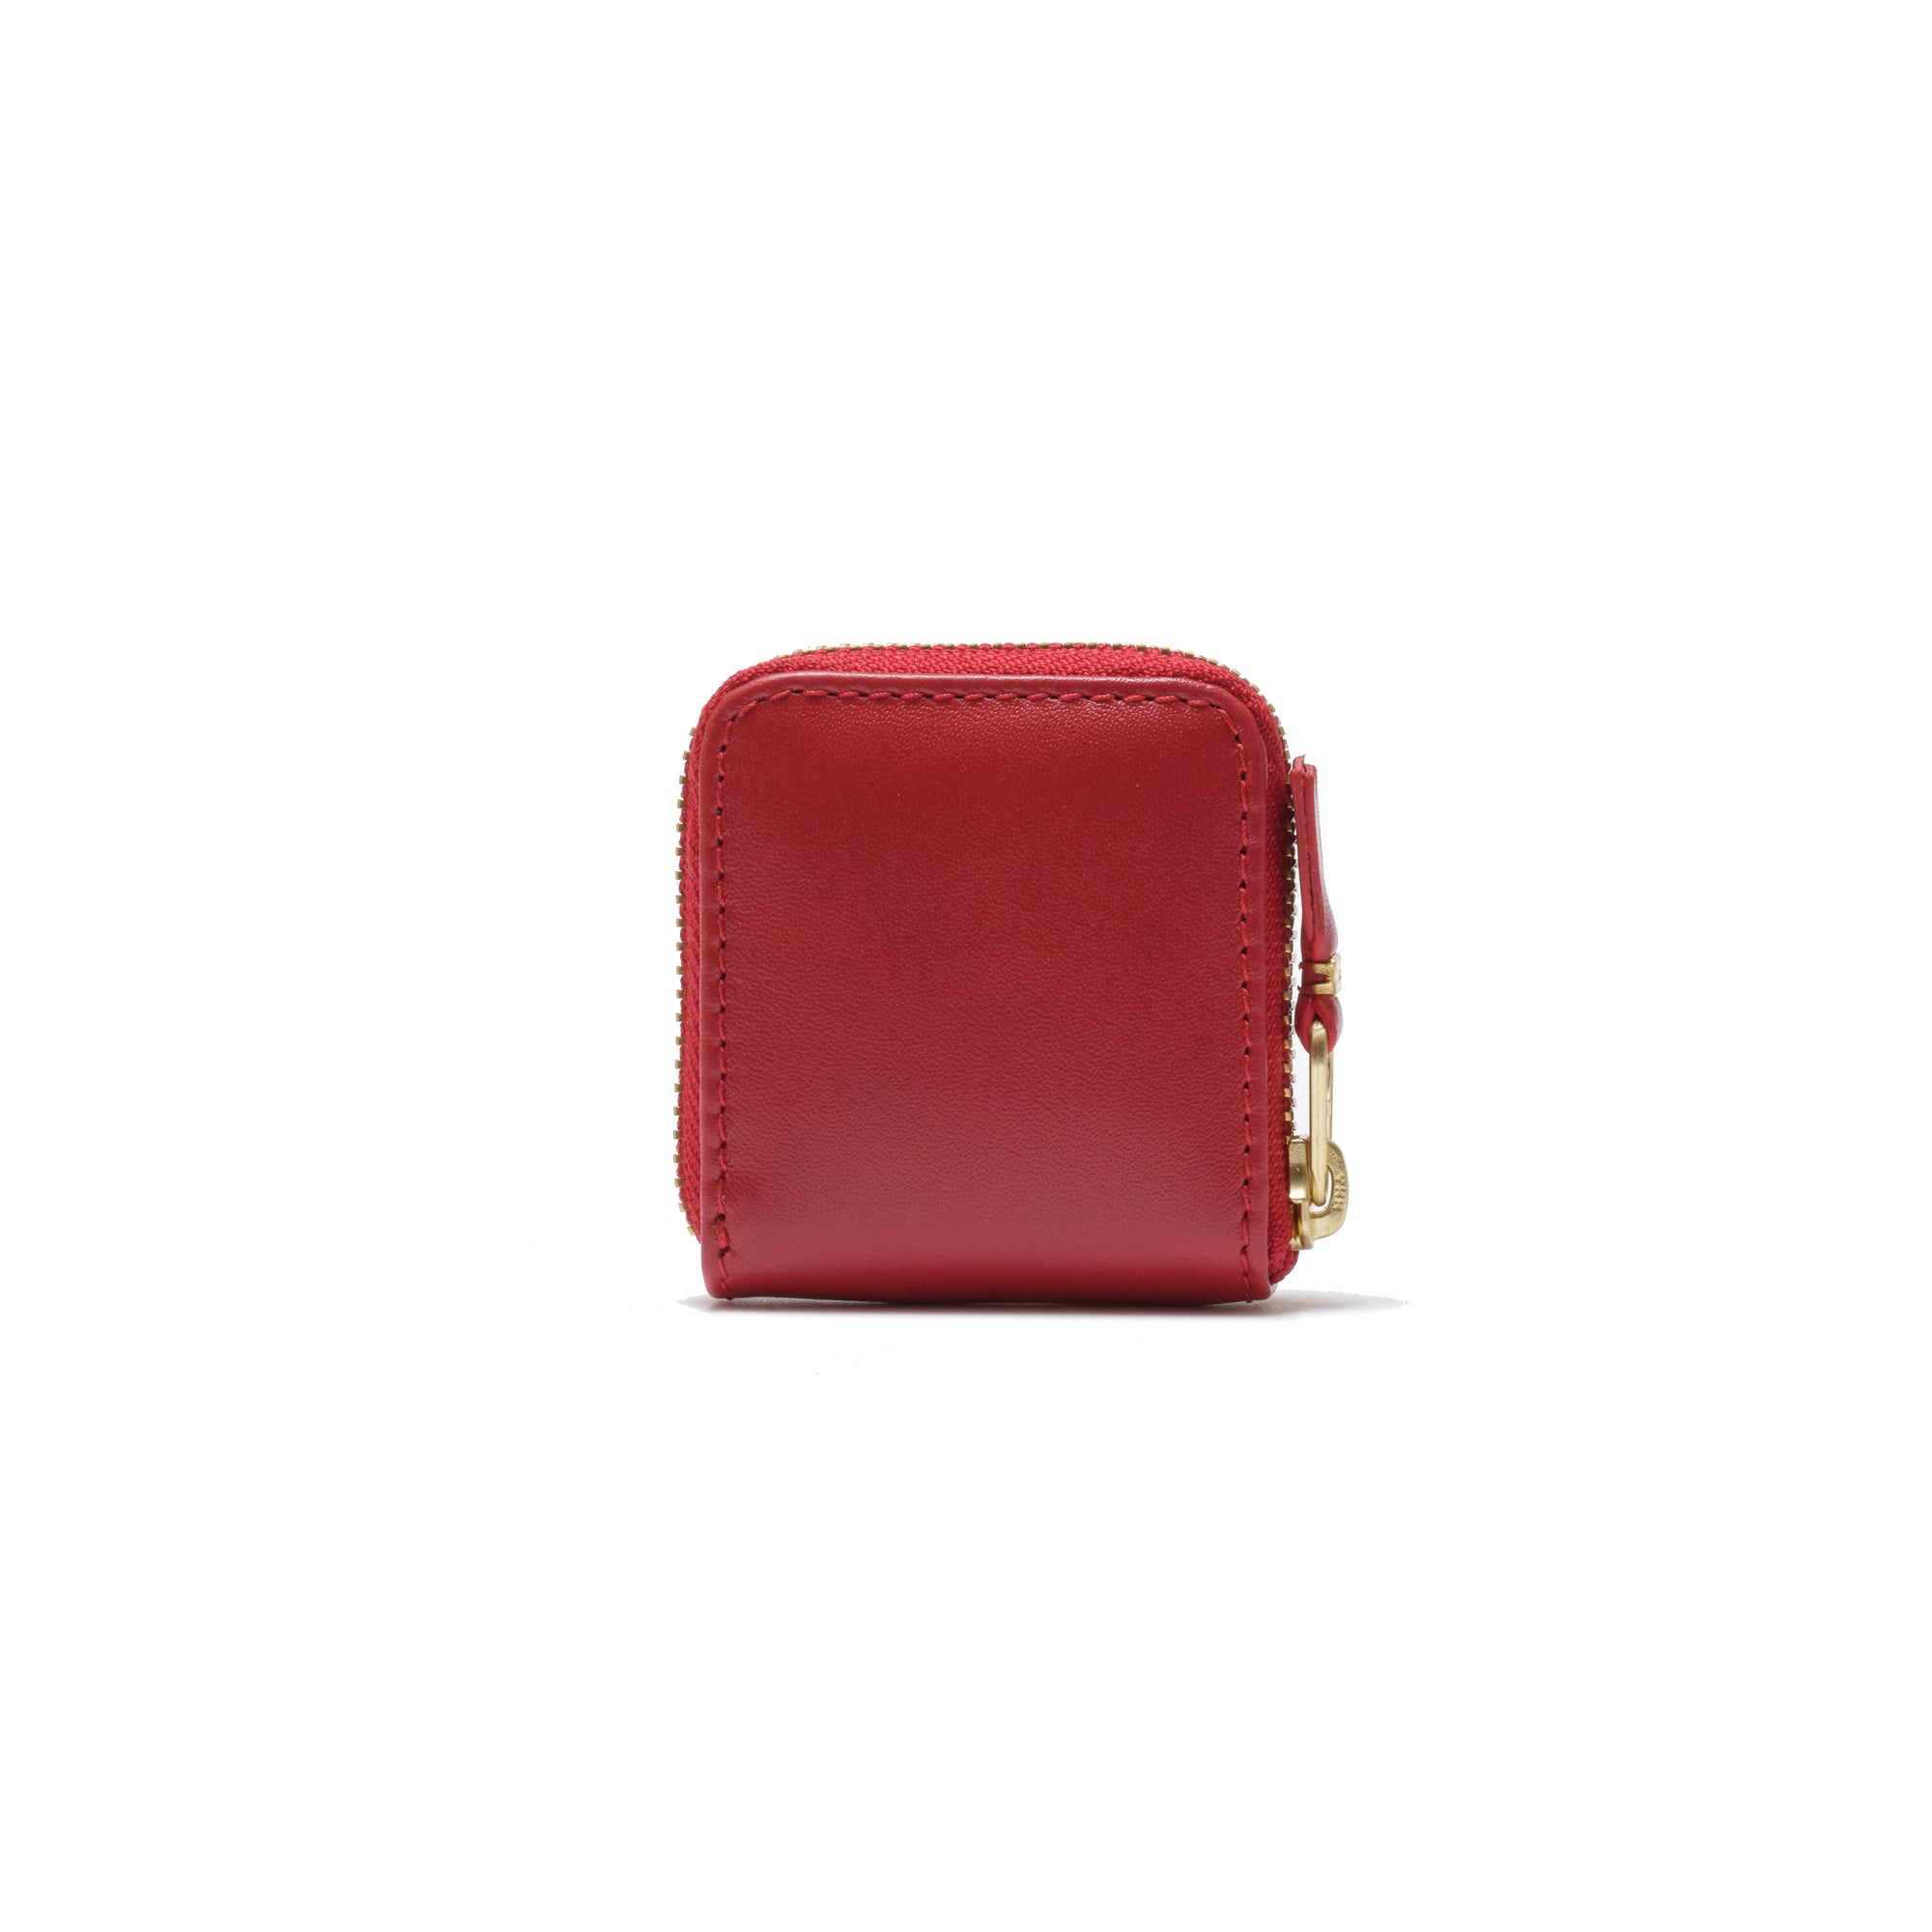 CDG WALLET - Colored Leather Line-8Z-A041 - (Red) view 2